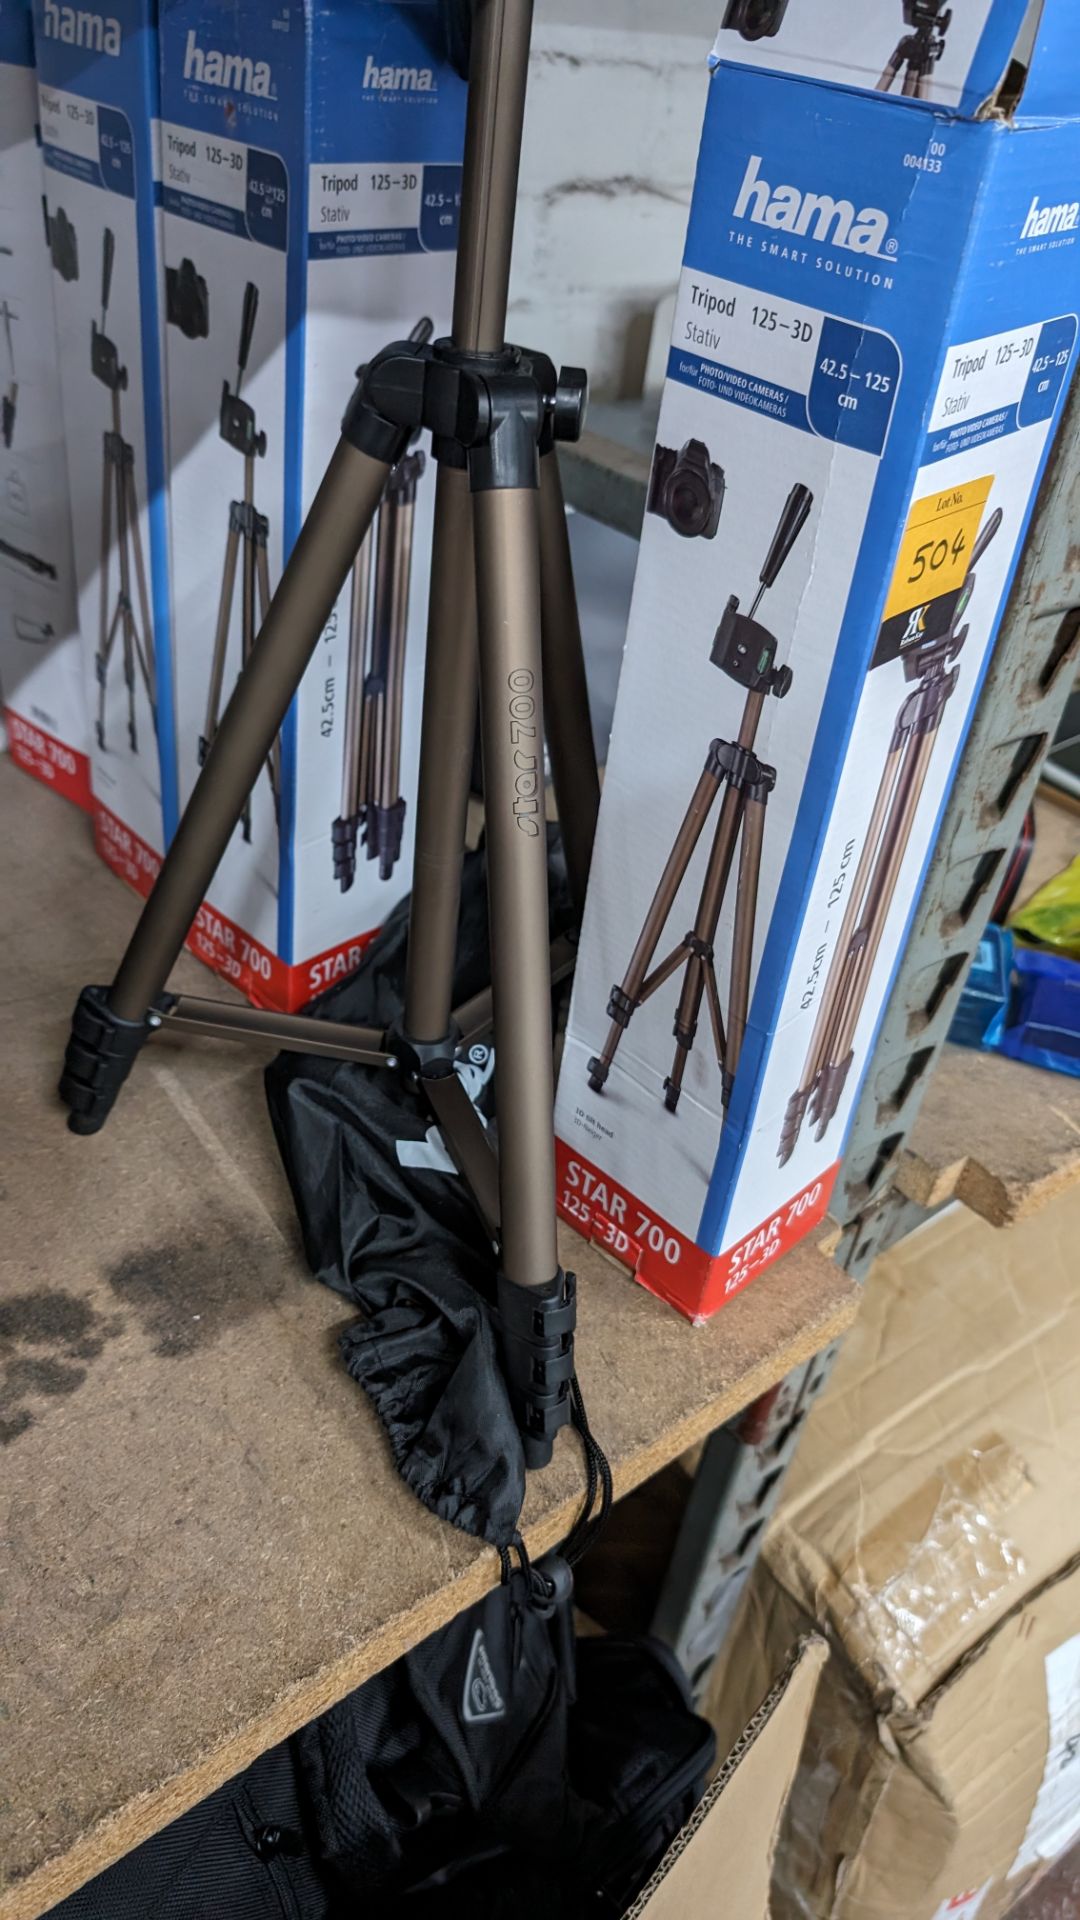 4 off Hama Star 700 tripods, 125-3D, 42.5-125cm - Image 6 of 6